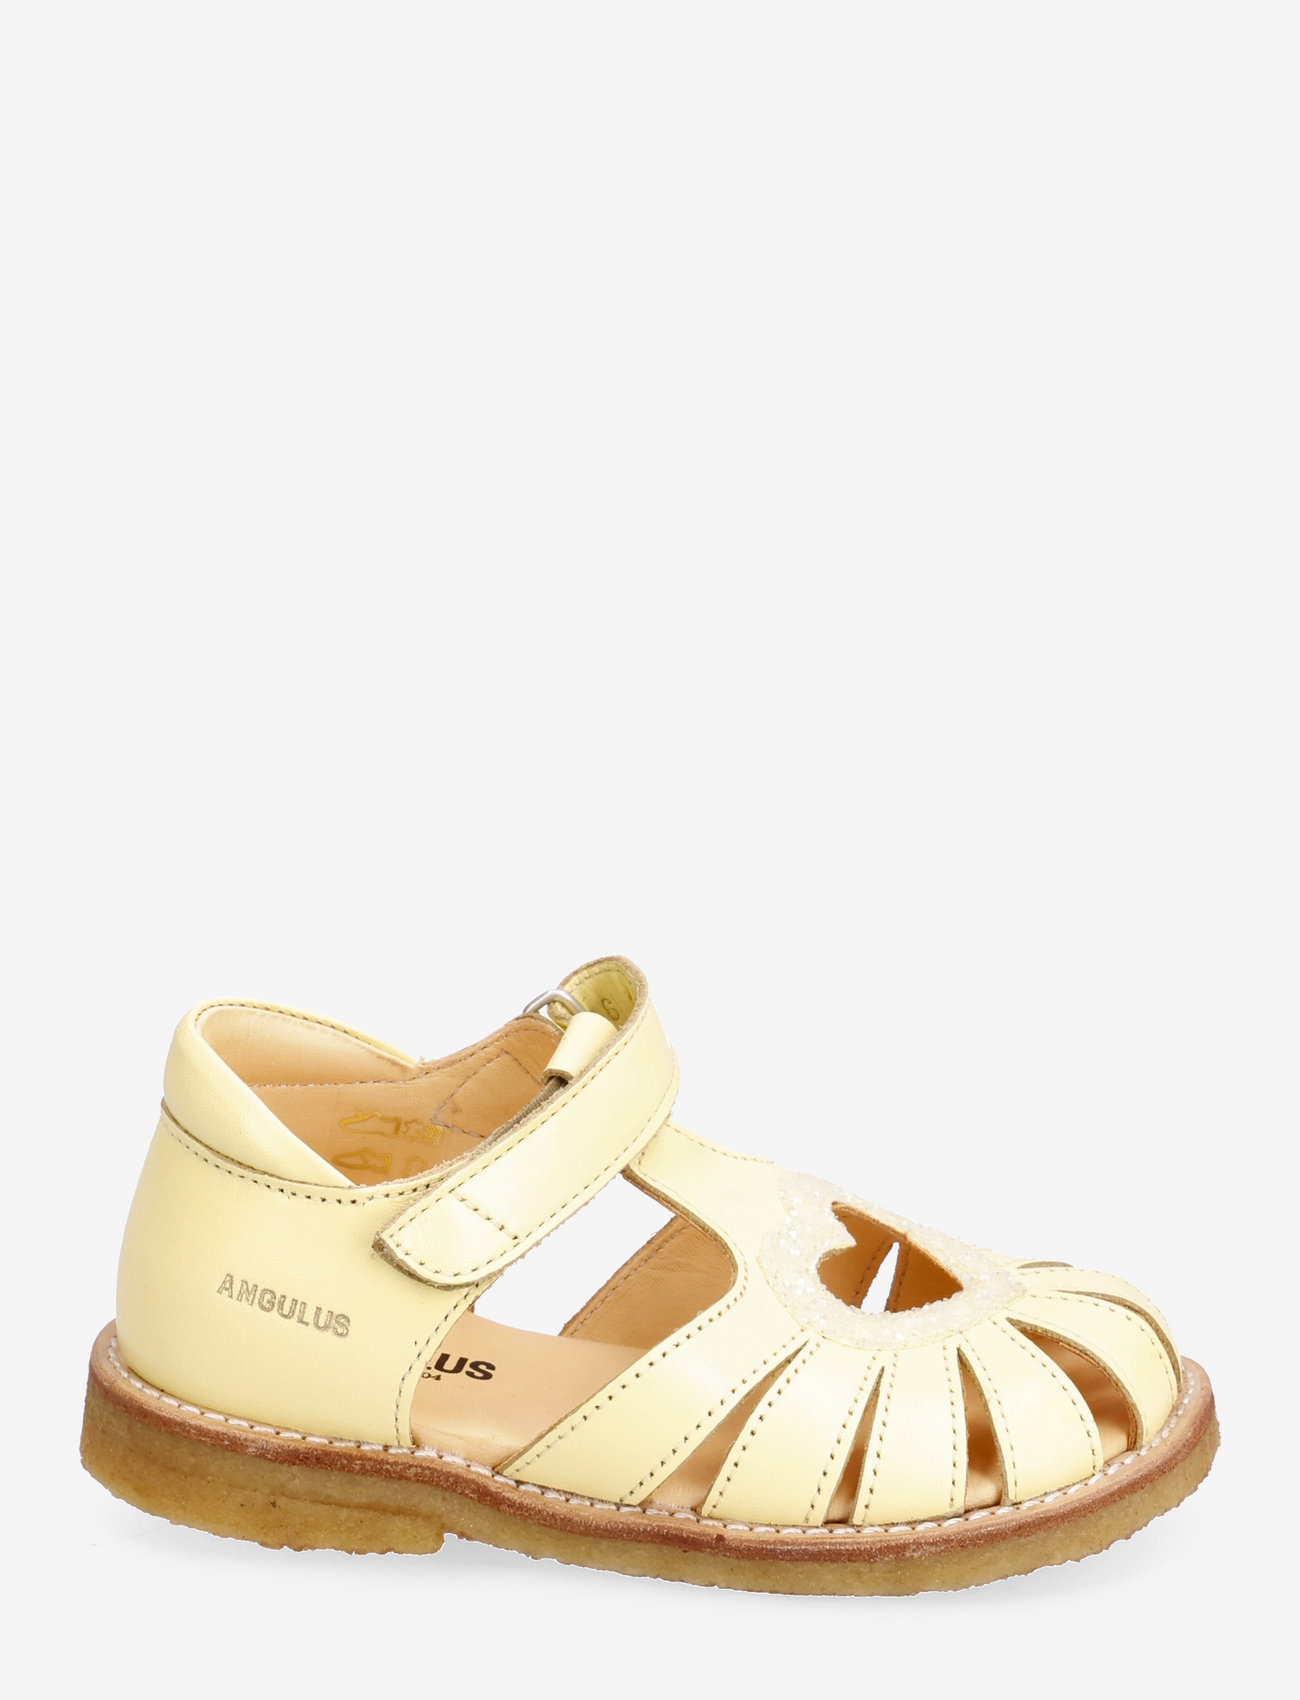 ANGULUS - Sandals - flat - closed toe - - sommarfynd - 1495/2696 ligth yellow/ligth y - 1